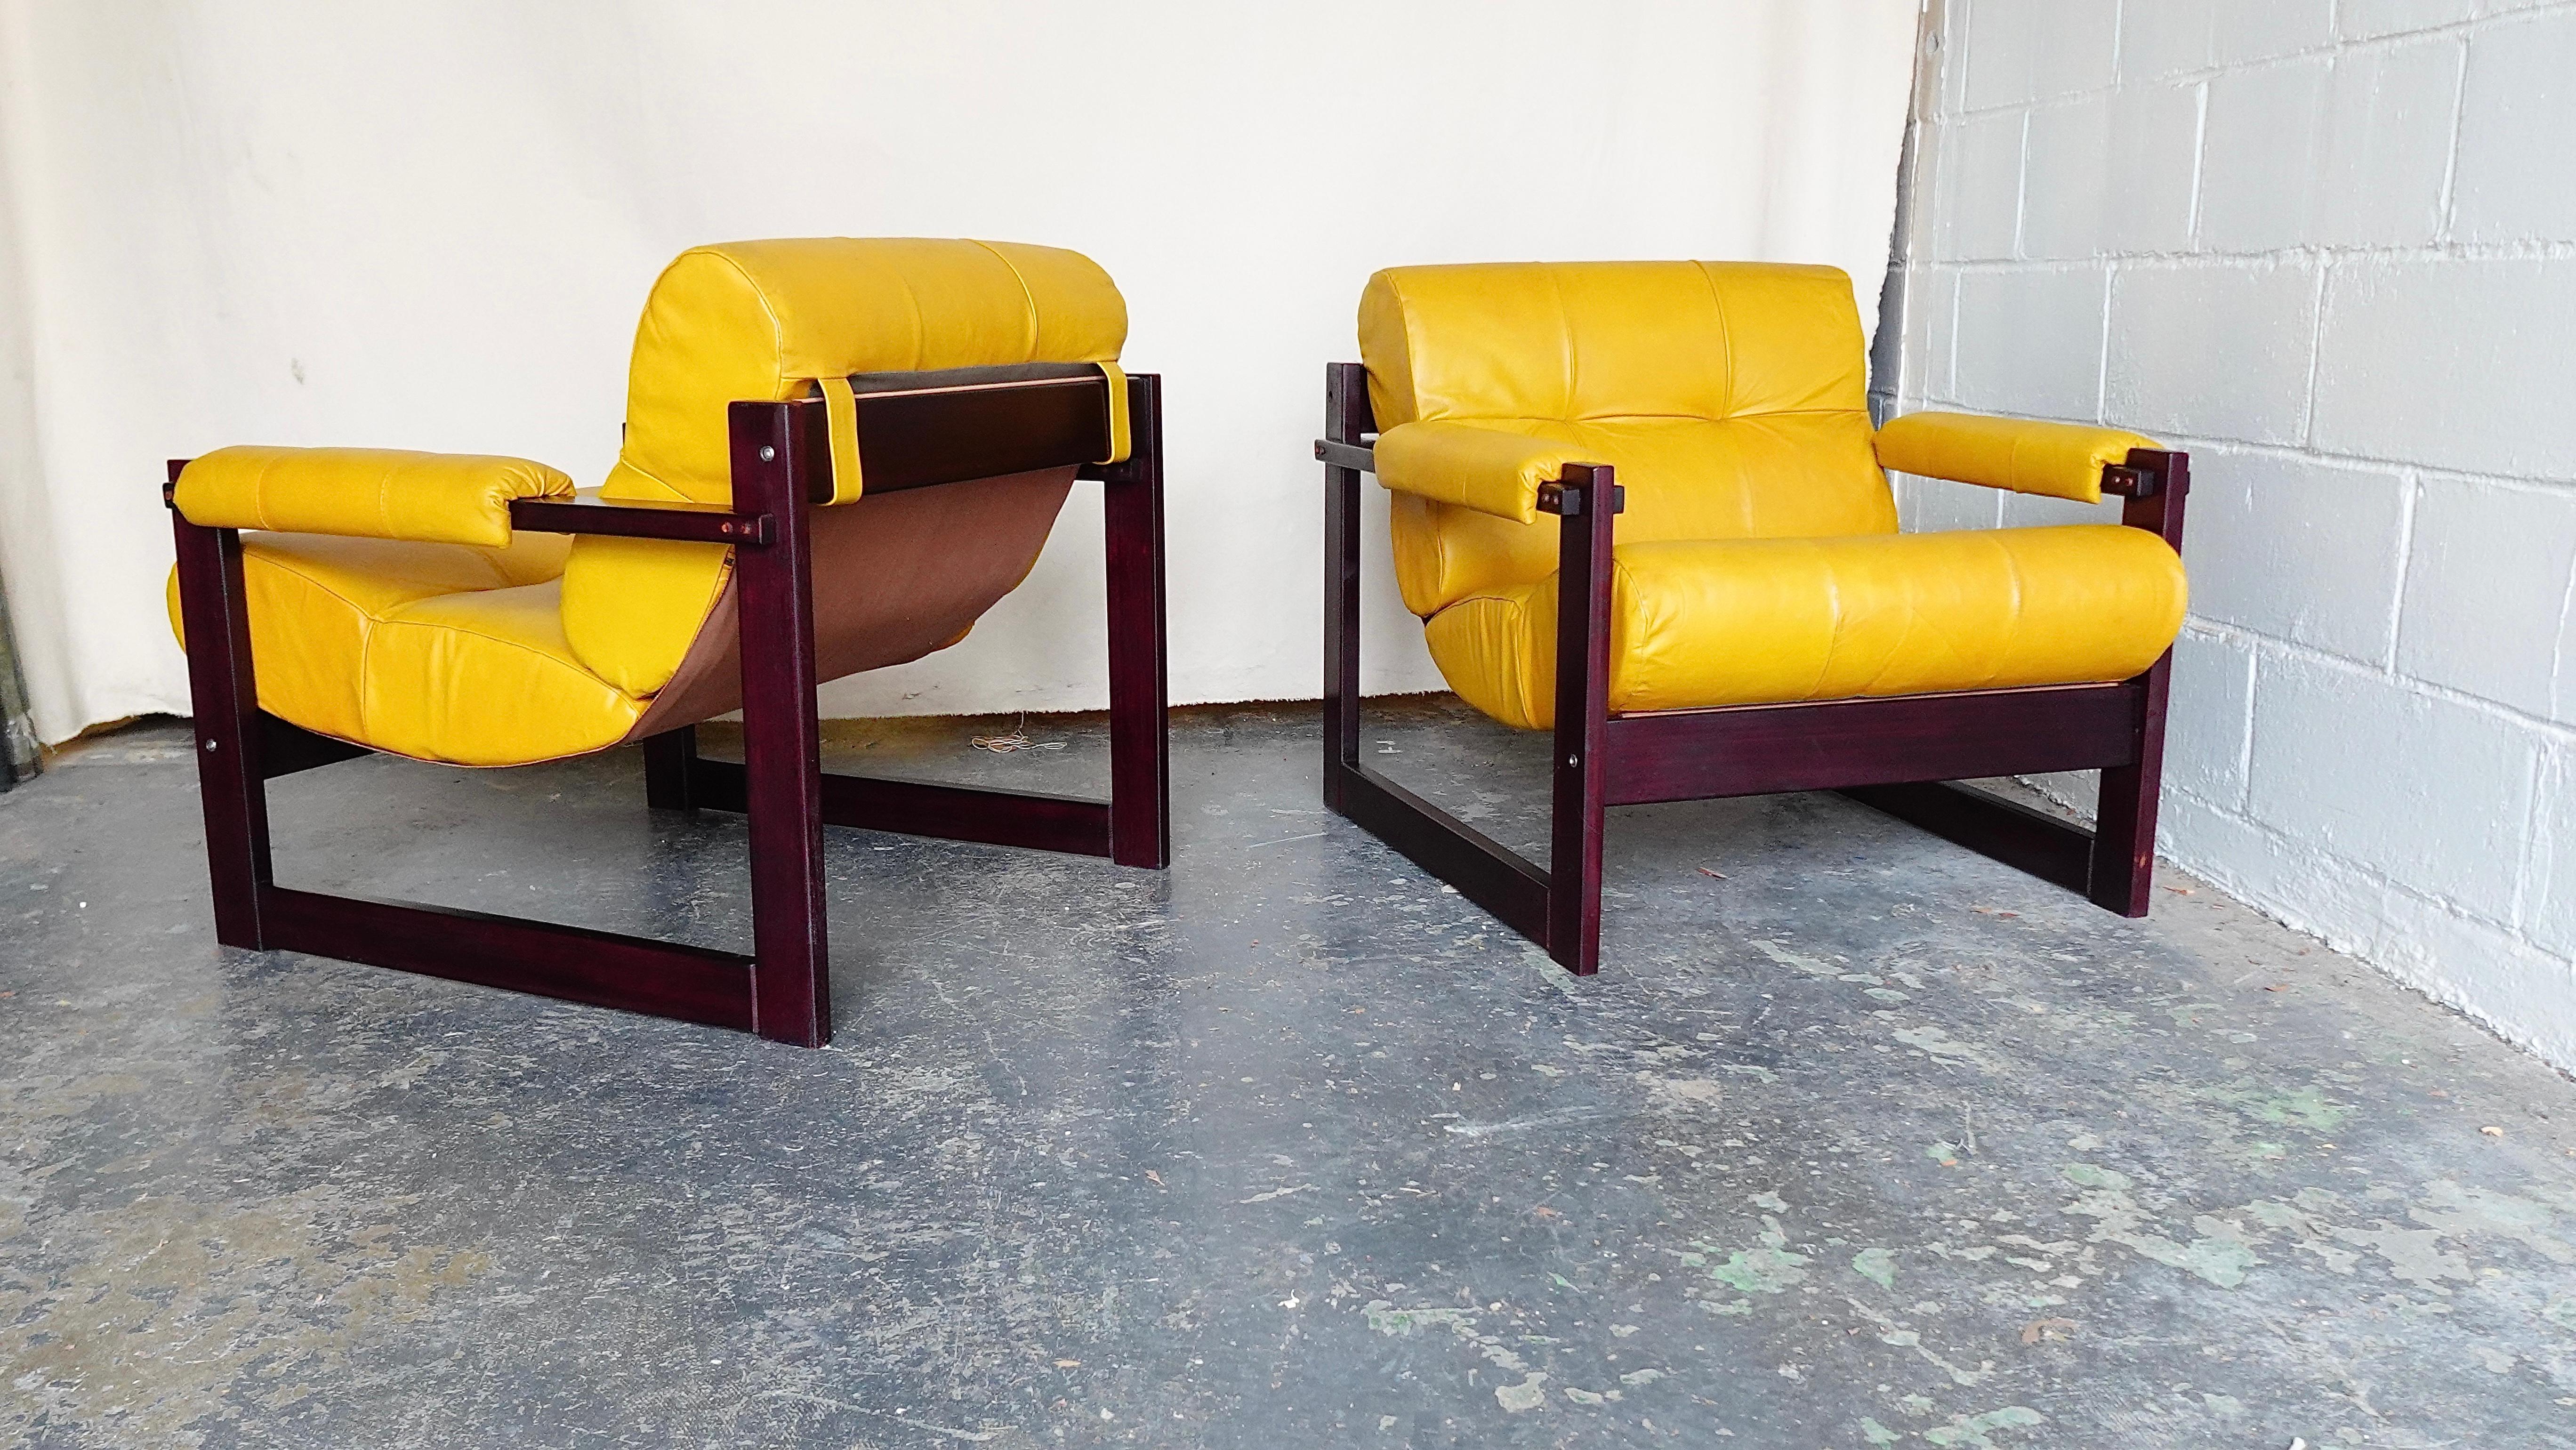 Pr. Percival Lafer MP-167 Lounge Chairs in Jatoba & Leather, 1970s For Sale 1